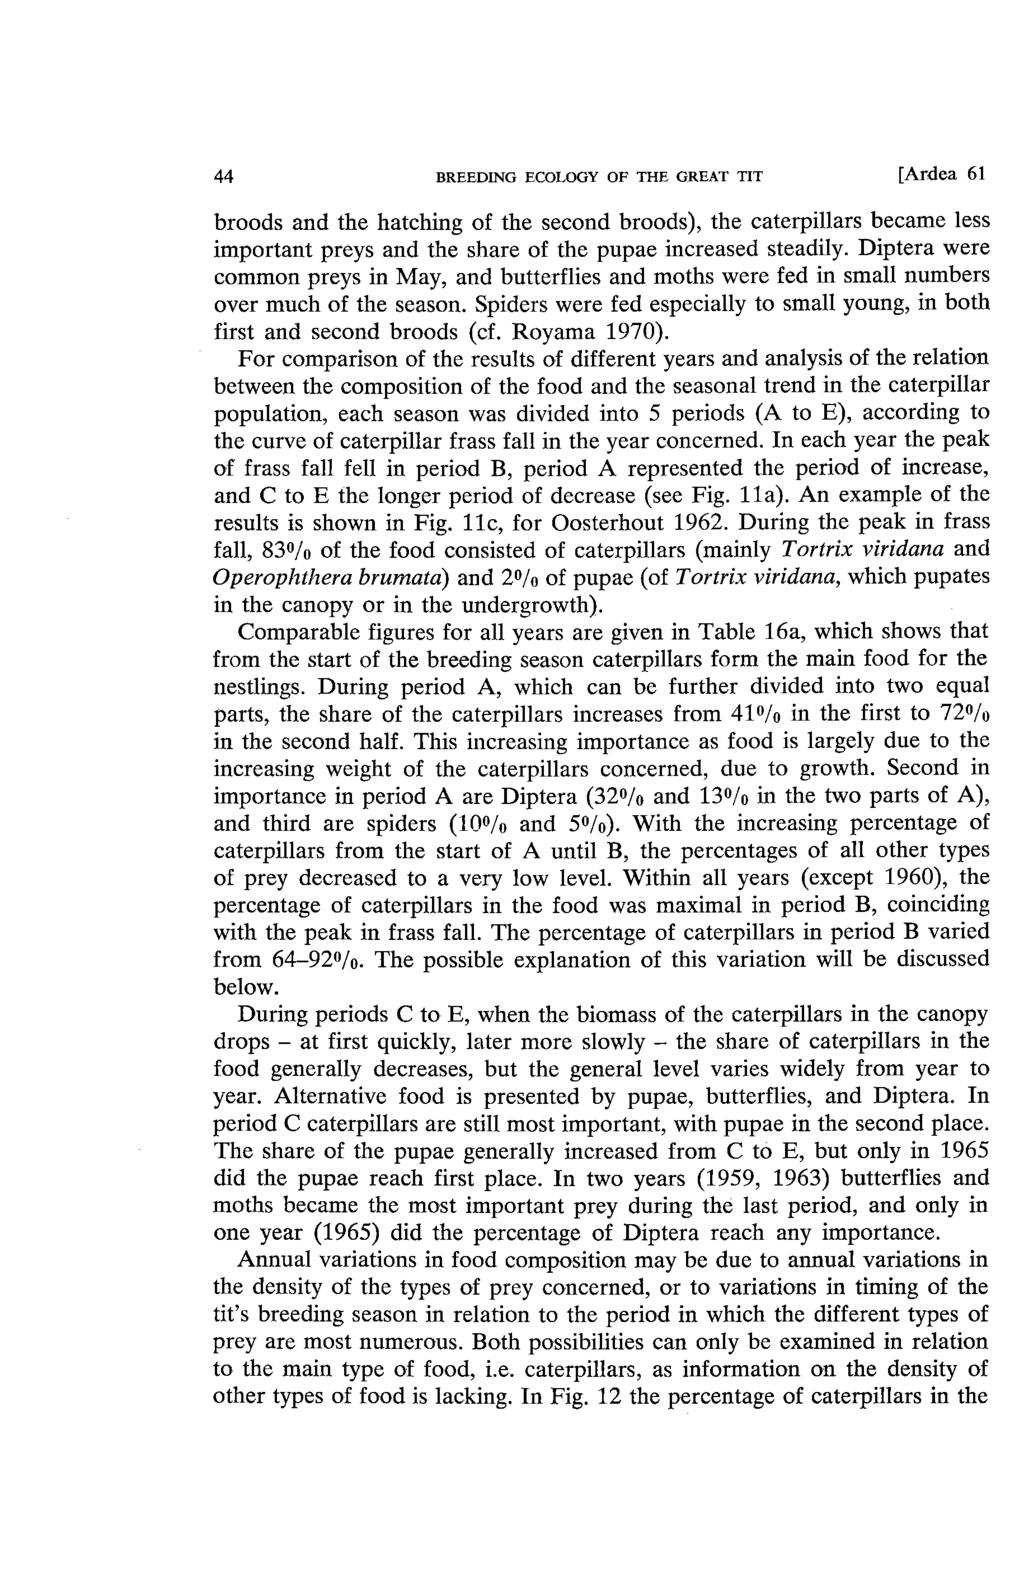 44 BREEDING ECOLOGY OF THE GREAT TIT [Ardea 61 broods and the hatching of the second broods), the caterpillars became less important preys and the share of the pupae increased steadily.